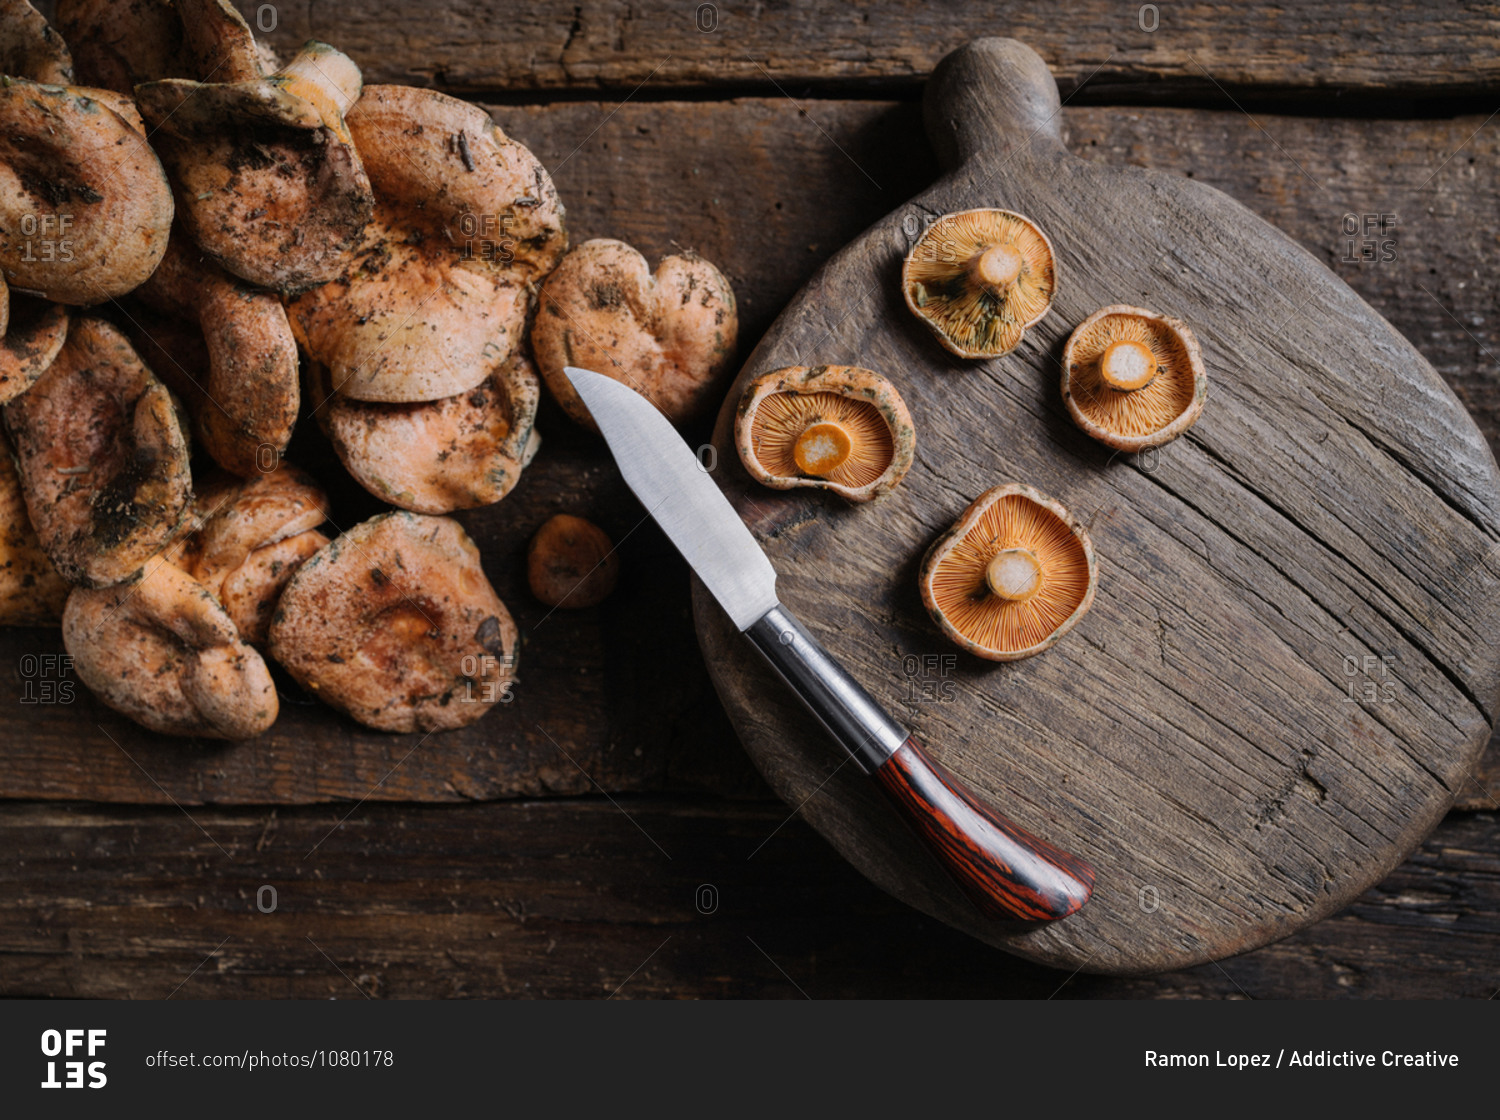 Top view heap of raw wild saffron milk cap or red pine mushrooms arranged on shabby wooden surface near knife and wooden cutting board